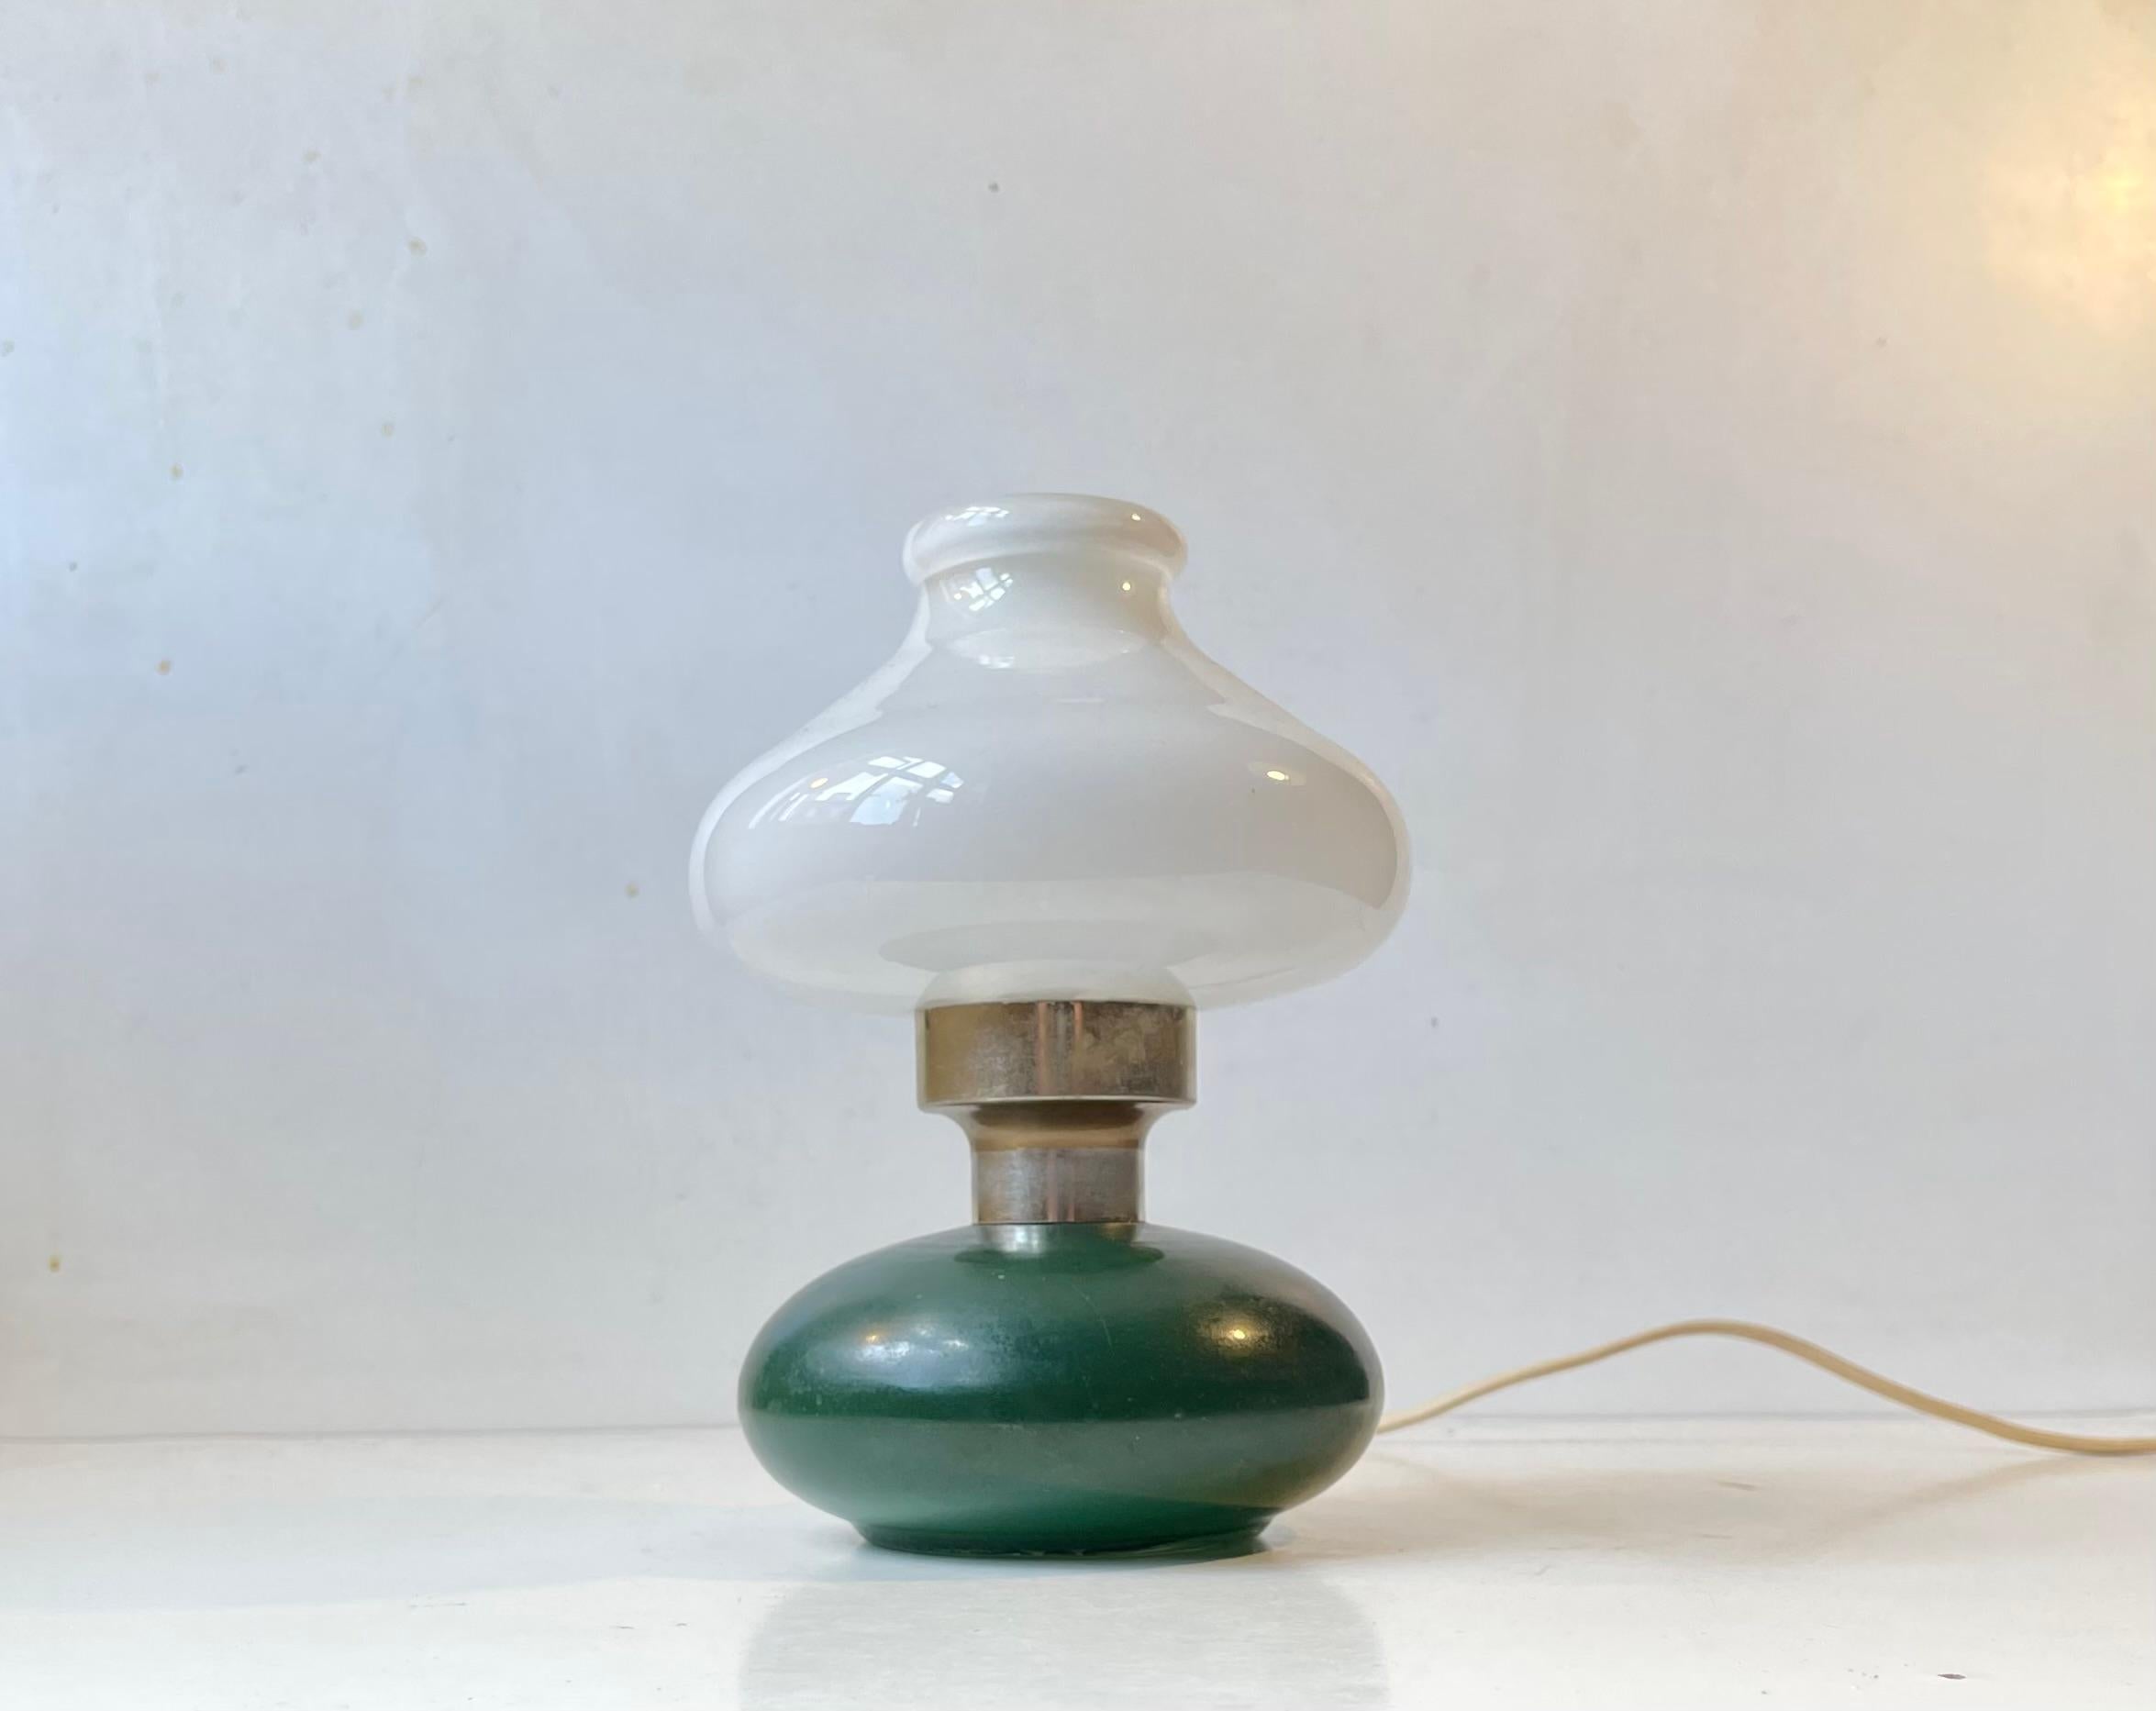 Small table light featuring a green base in painted glass and a white opaline glass, It has a switch to its cord. Manufactured in Sweden during the 1970s. Measurements: H: 20, D: 14 cm. For the US. It will come installed with a 110 watt adaptor plug